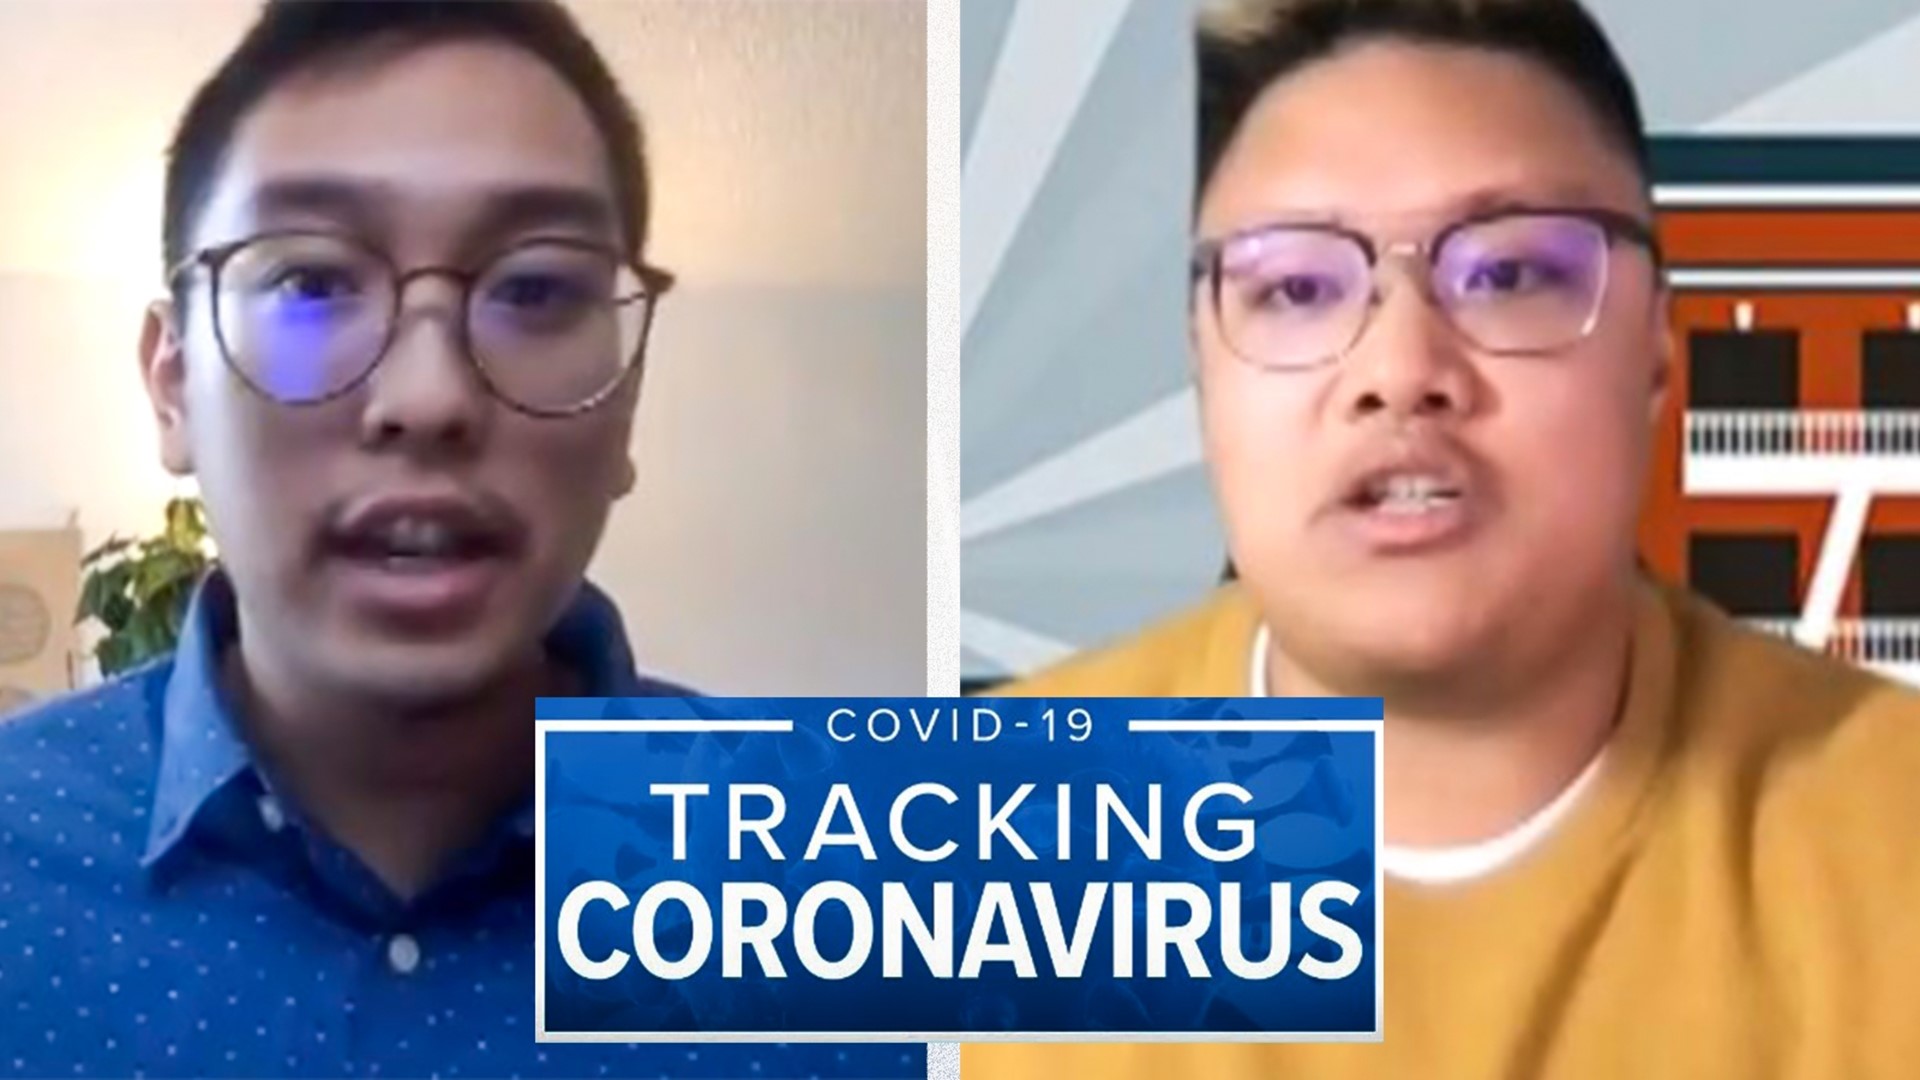 With Little Manila Rising in Stockton, a 28-year-old survivor of severe COVID-19-related symptoms wants to educate the Filipino community on harm reduction.